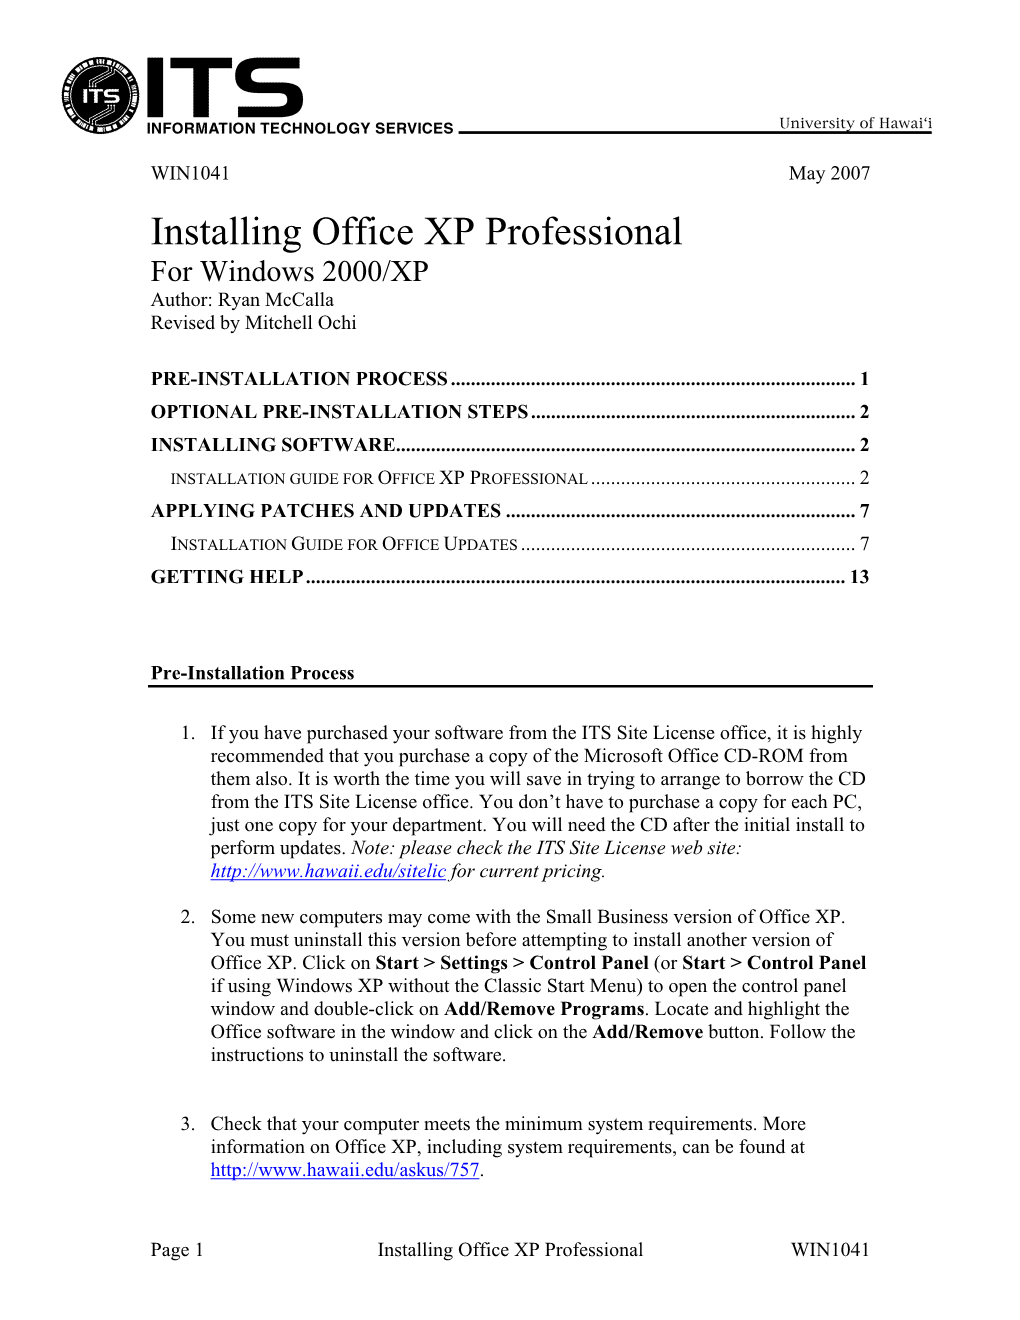 Installing Office XP Professional for Windows 2000/XP Author: Ryan Mccalla Revised by Mitchell Ochi